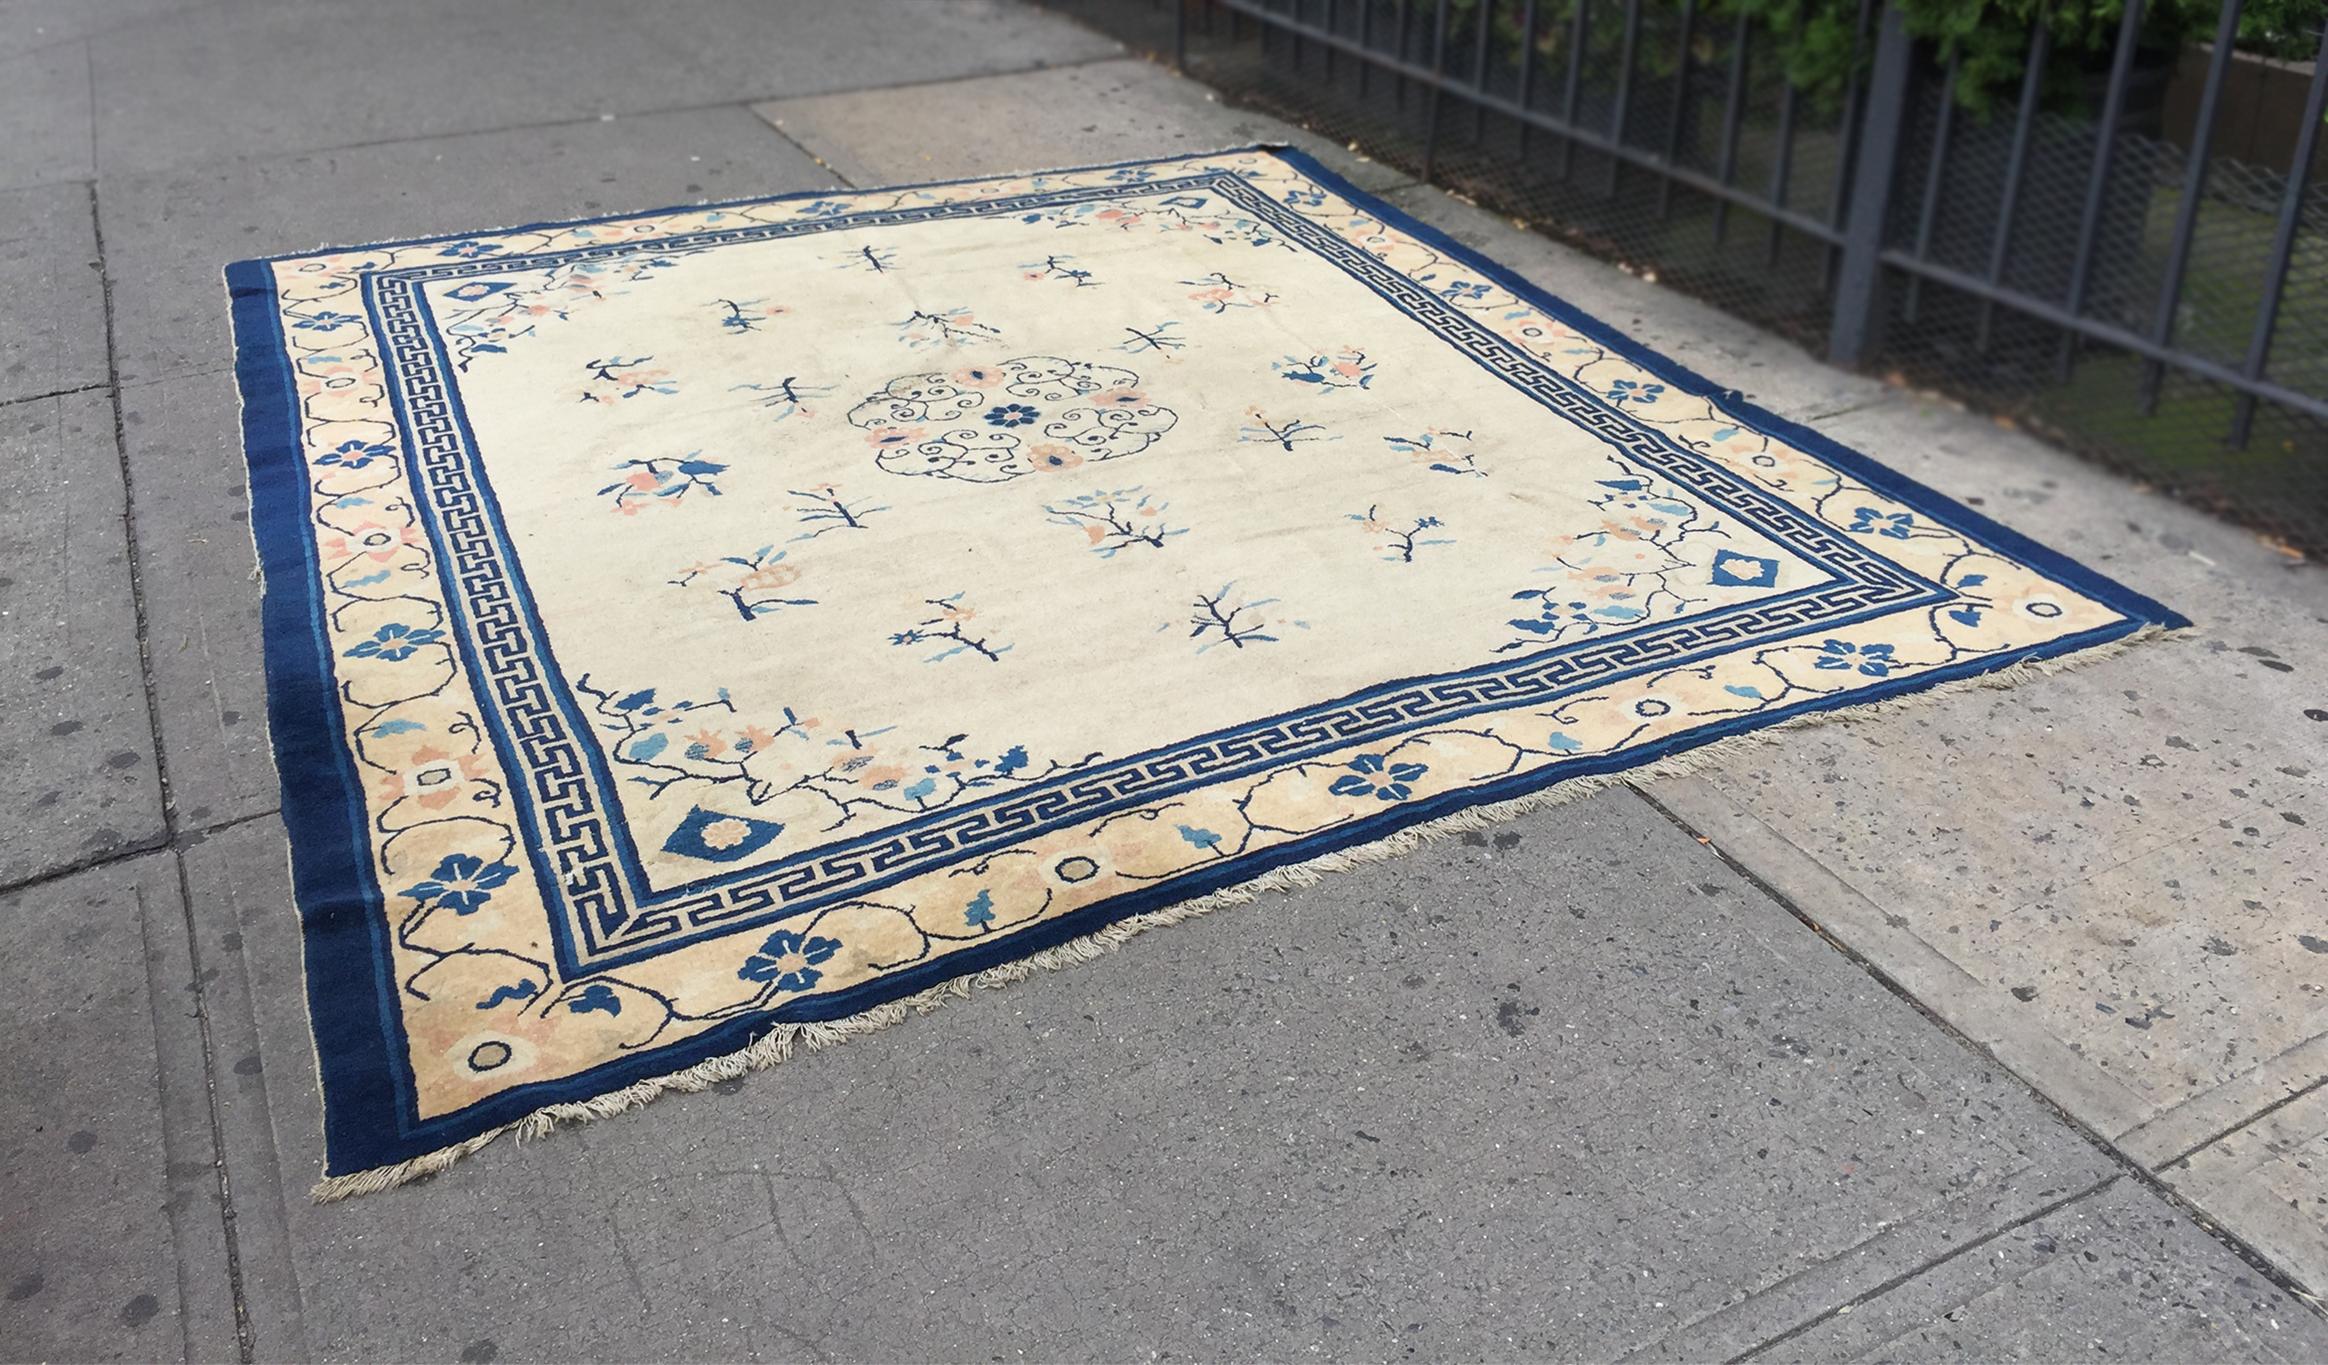 This Chinese Art Deco rug was handcrafted in the 1930s. The elegant design is composed of a central medallion with blue flowering curlicues and peach-hued blossoms set in a light tan field. Around the medallion are two rings of flowering branches